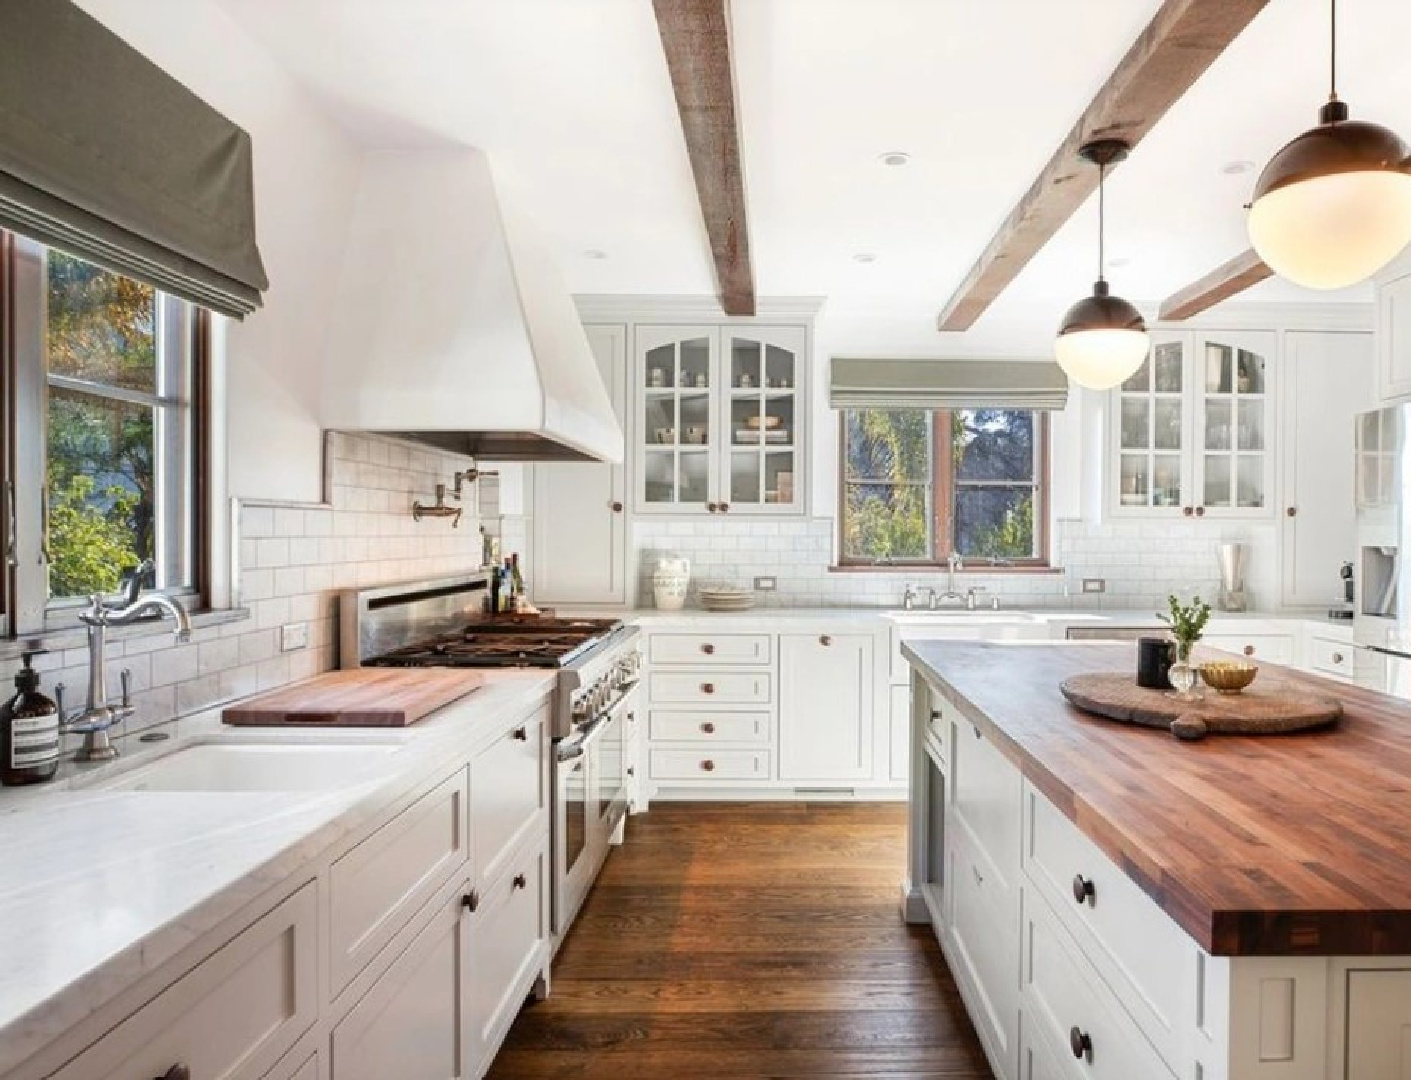 West Hollywood 1920s cottage with view of Chateau Marmont renovated with English country style by Avi Brosh & Kirsten Leigh Pratt - (photo: realtor.com). #englishcountry